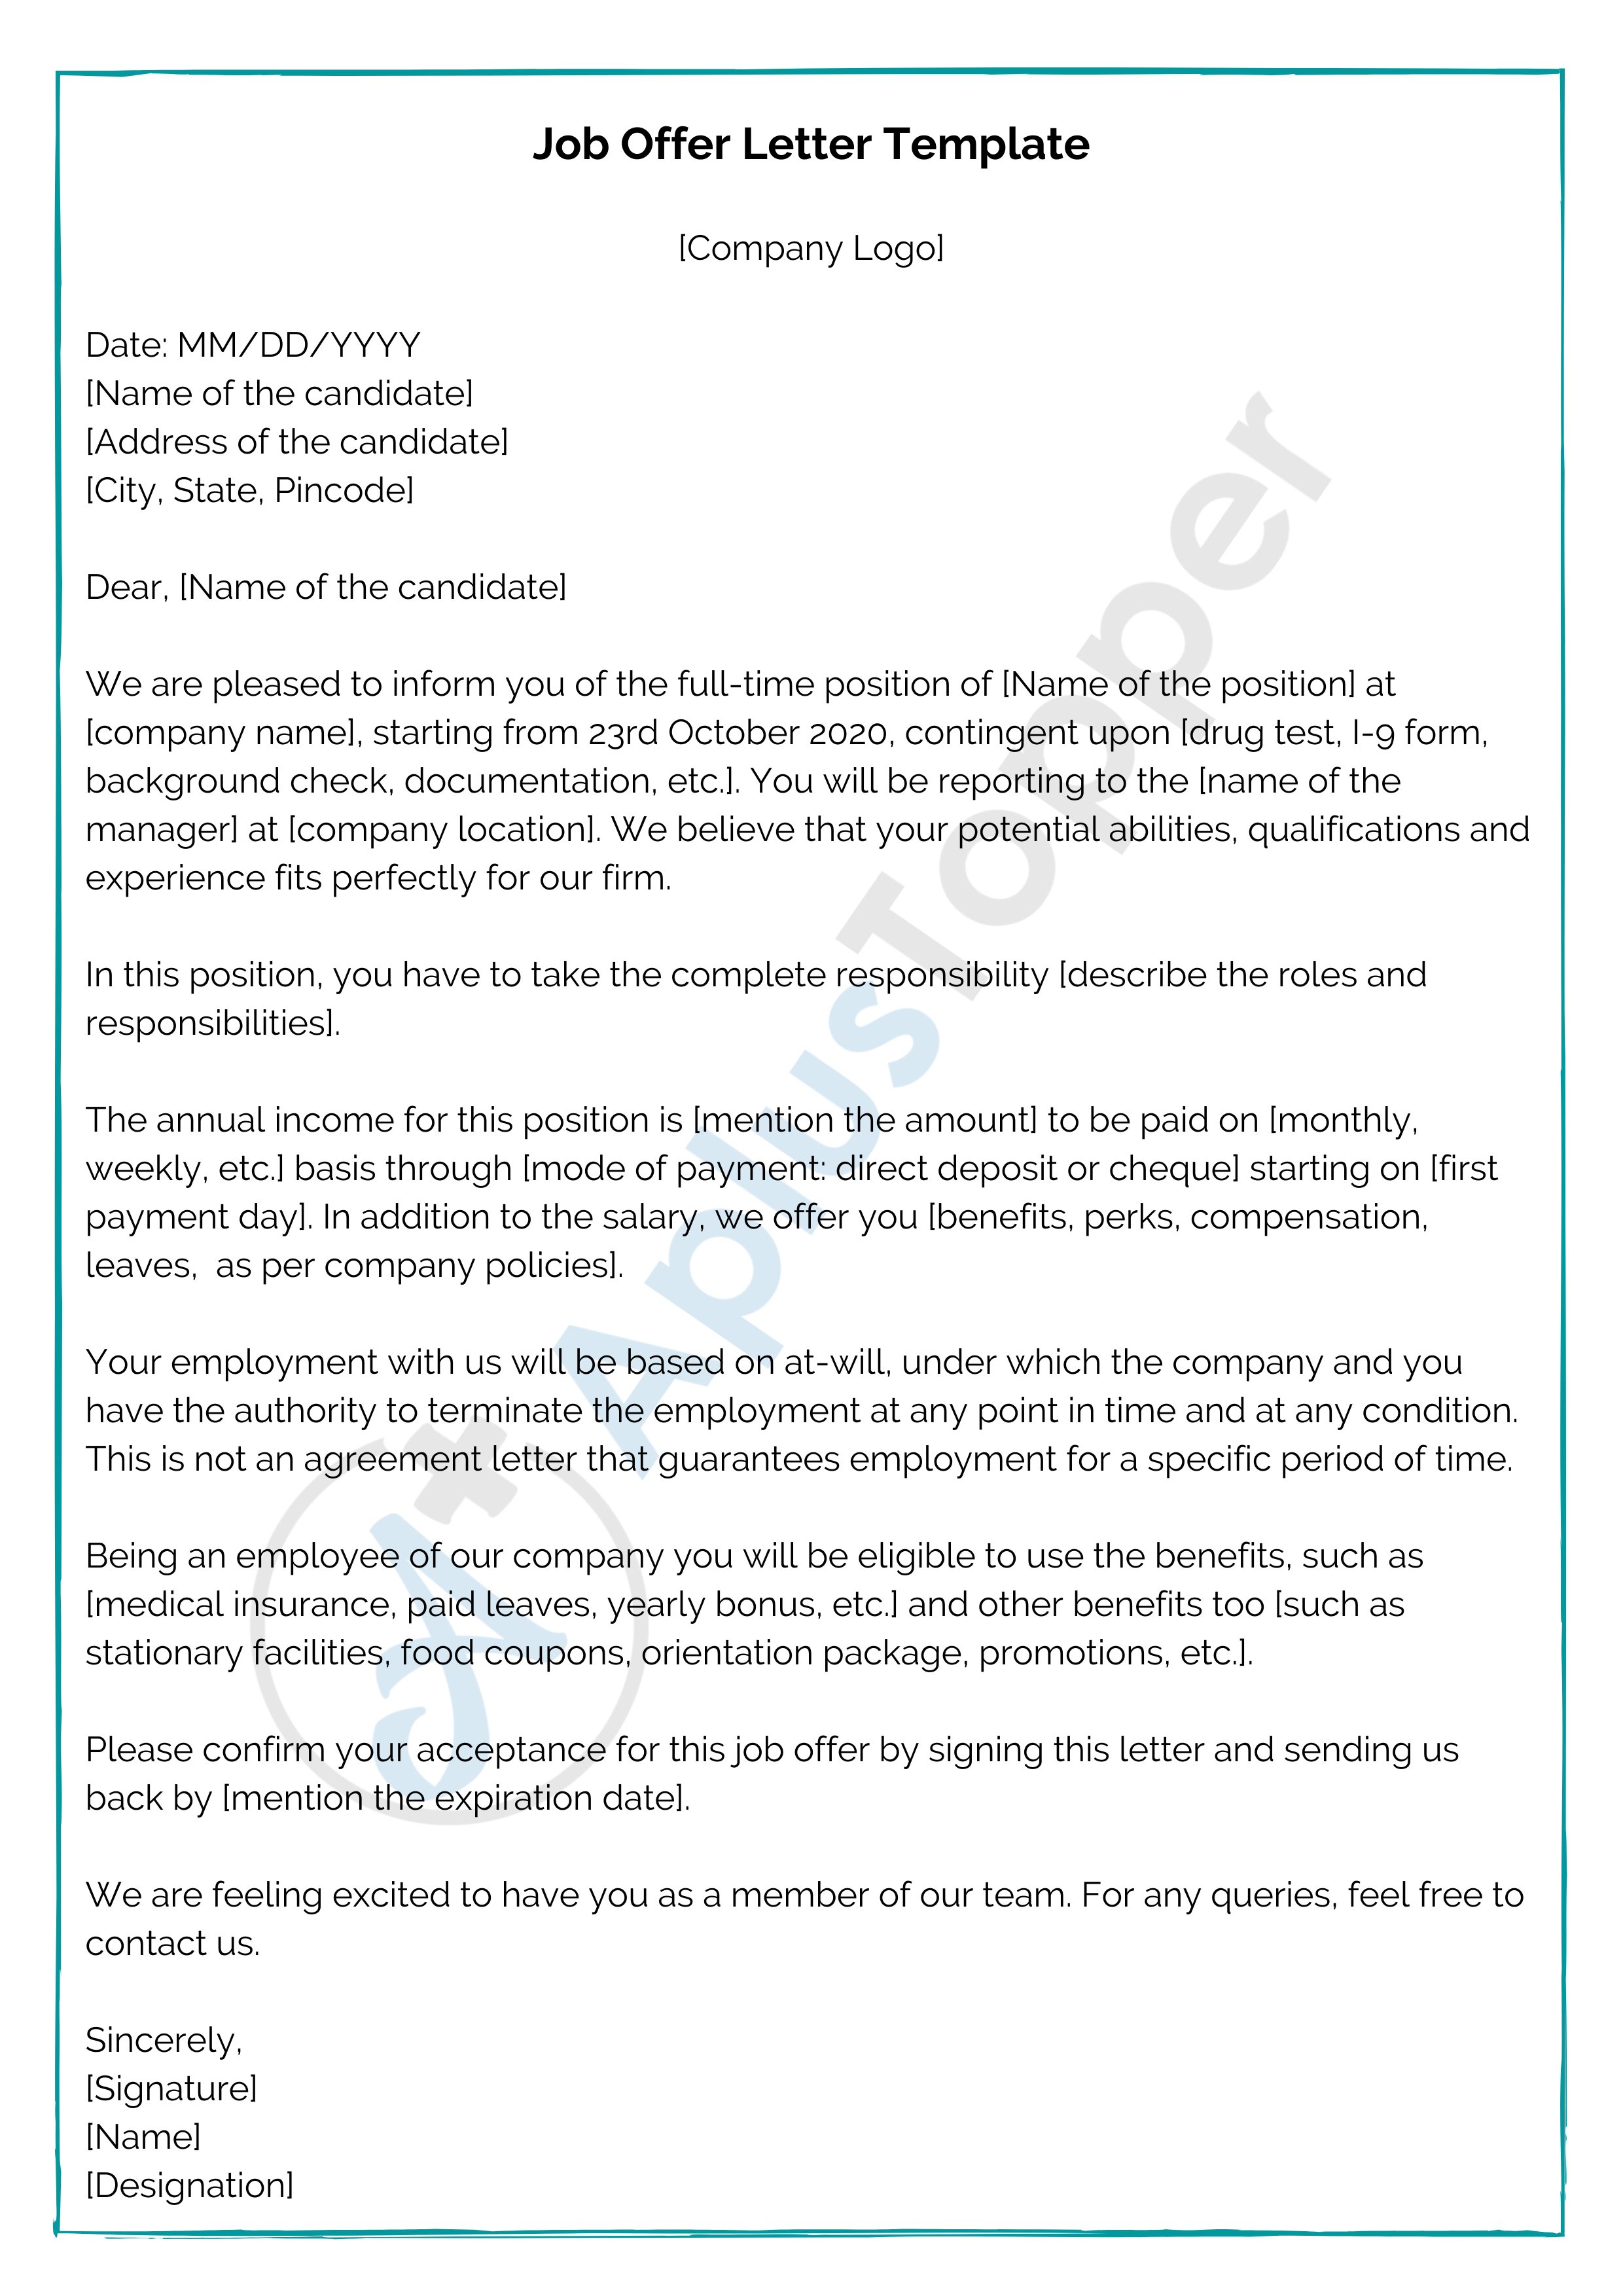 Job Offer Letter | Format, Sample, Template and How To Write a Job